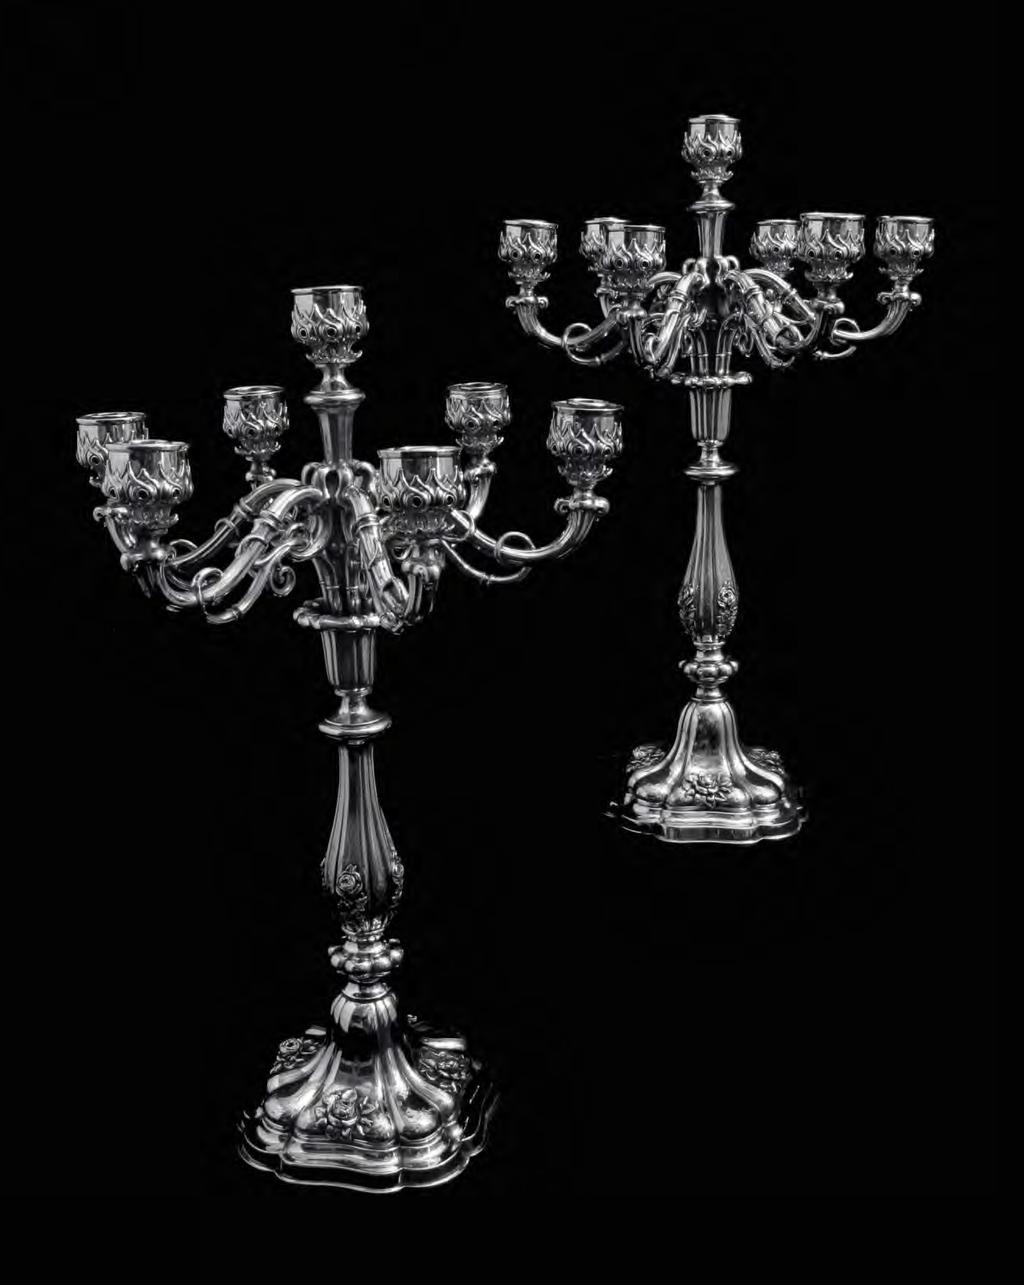 Direct from a Private Mansion (Hotel Particulier) in Versailles, A Magnificent Pair of 19th Century Spanish 915 Silver, 7 Candle Candelabra in Excellent